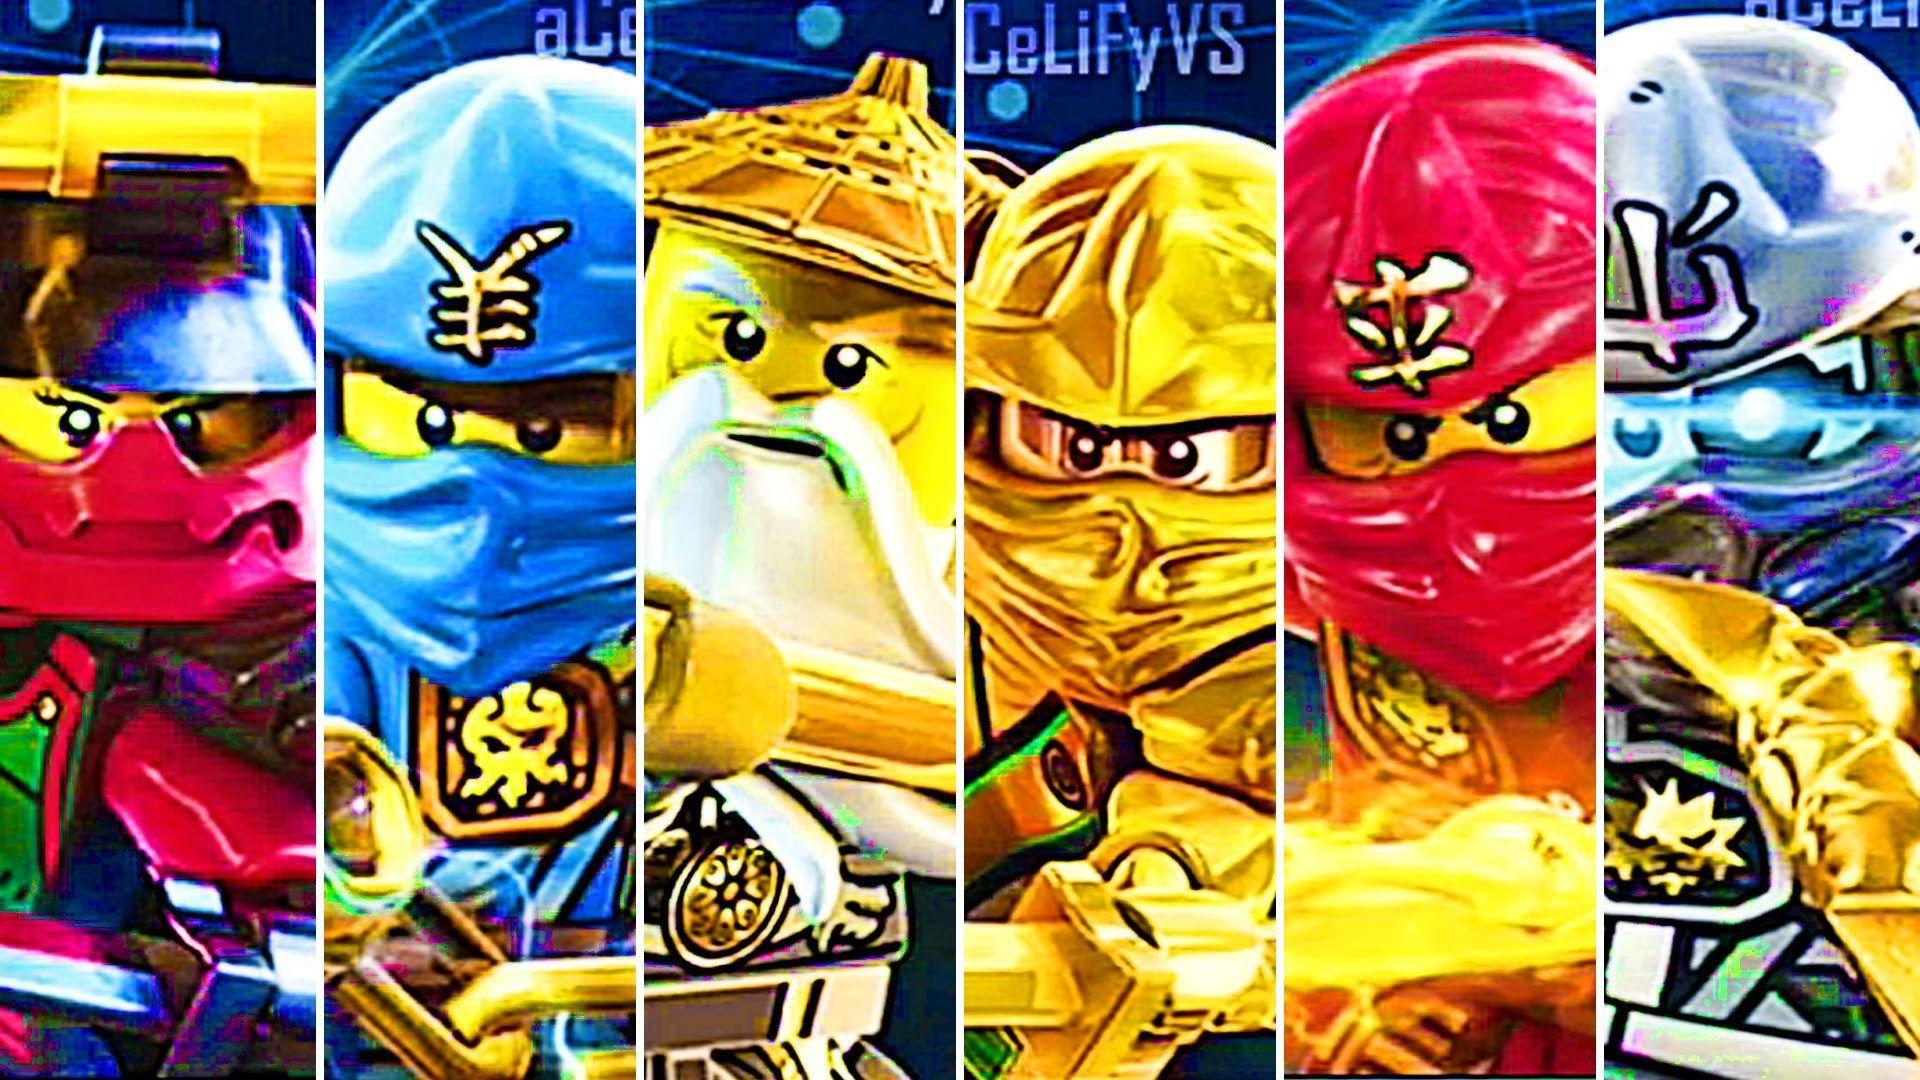 66947 The LEGO Ninjago Movie Video Game HD  Rare Gallery HD Wallpapers